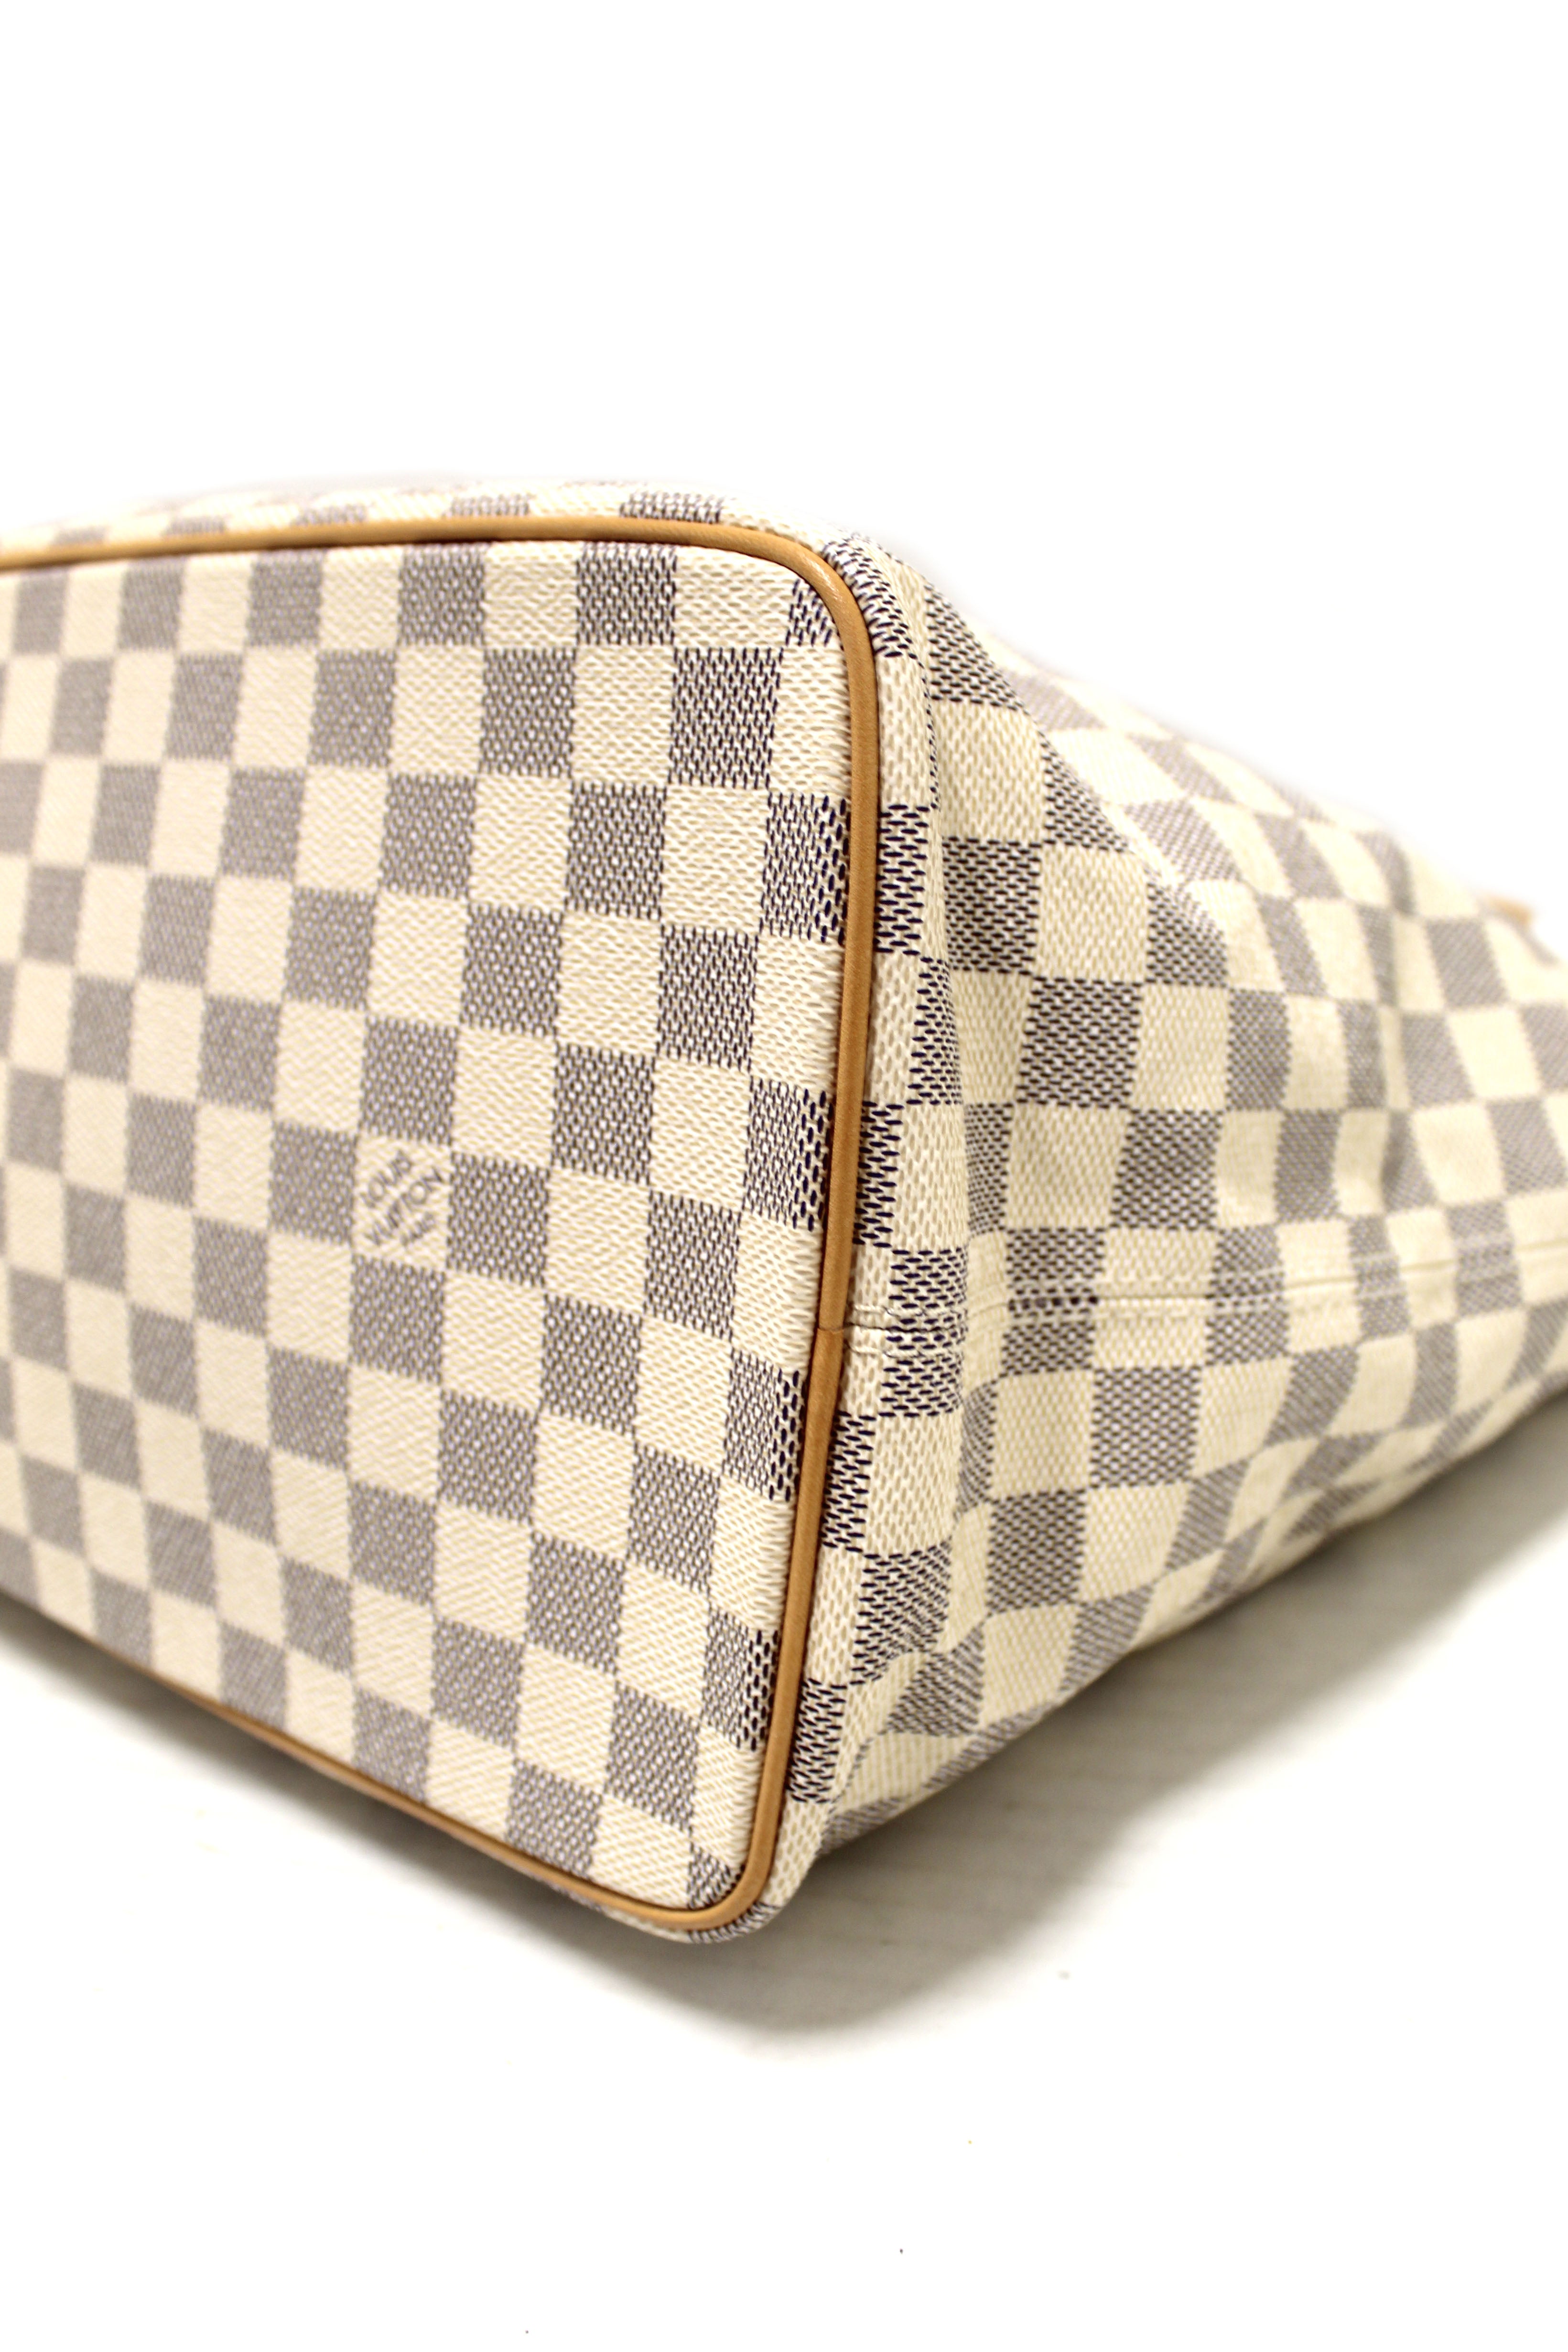 Shop for Louis Vuitton Damier Azur Canvas Leather Saleya MM Bag - Shipped  from USA